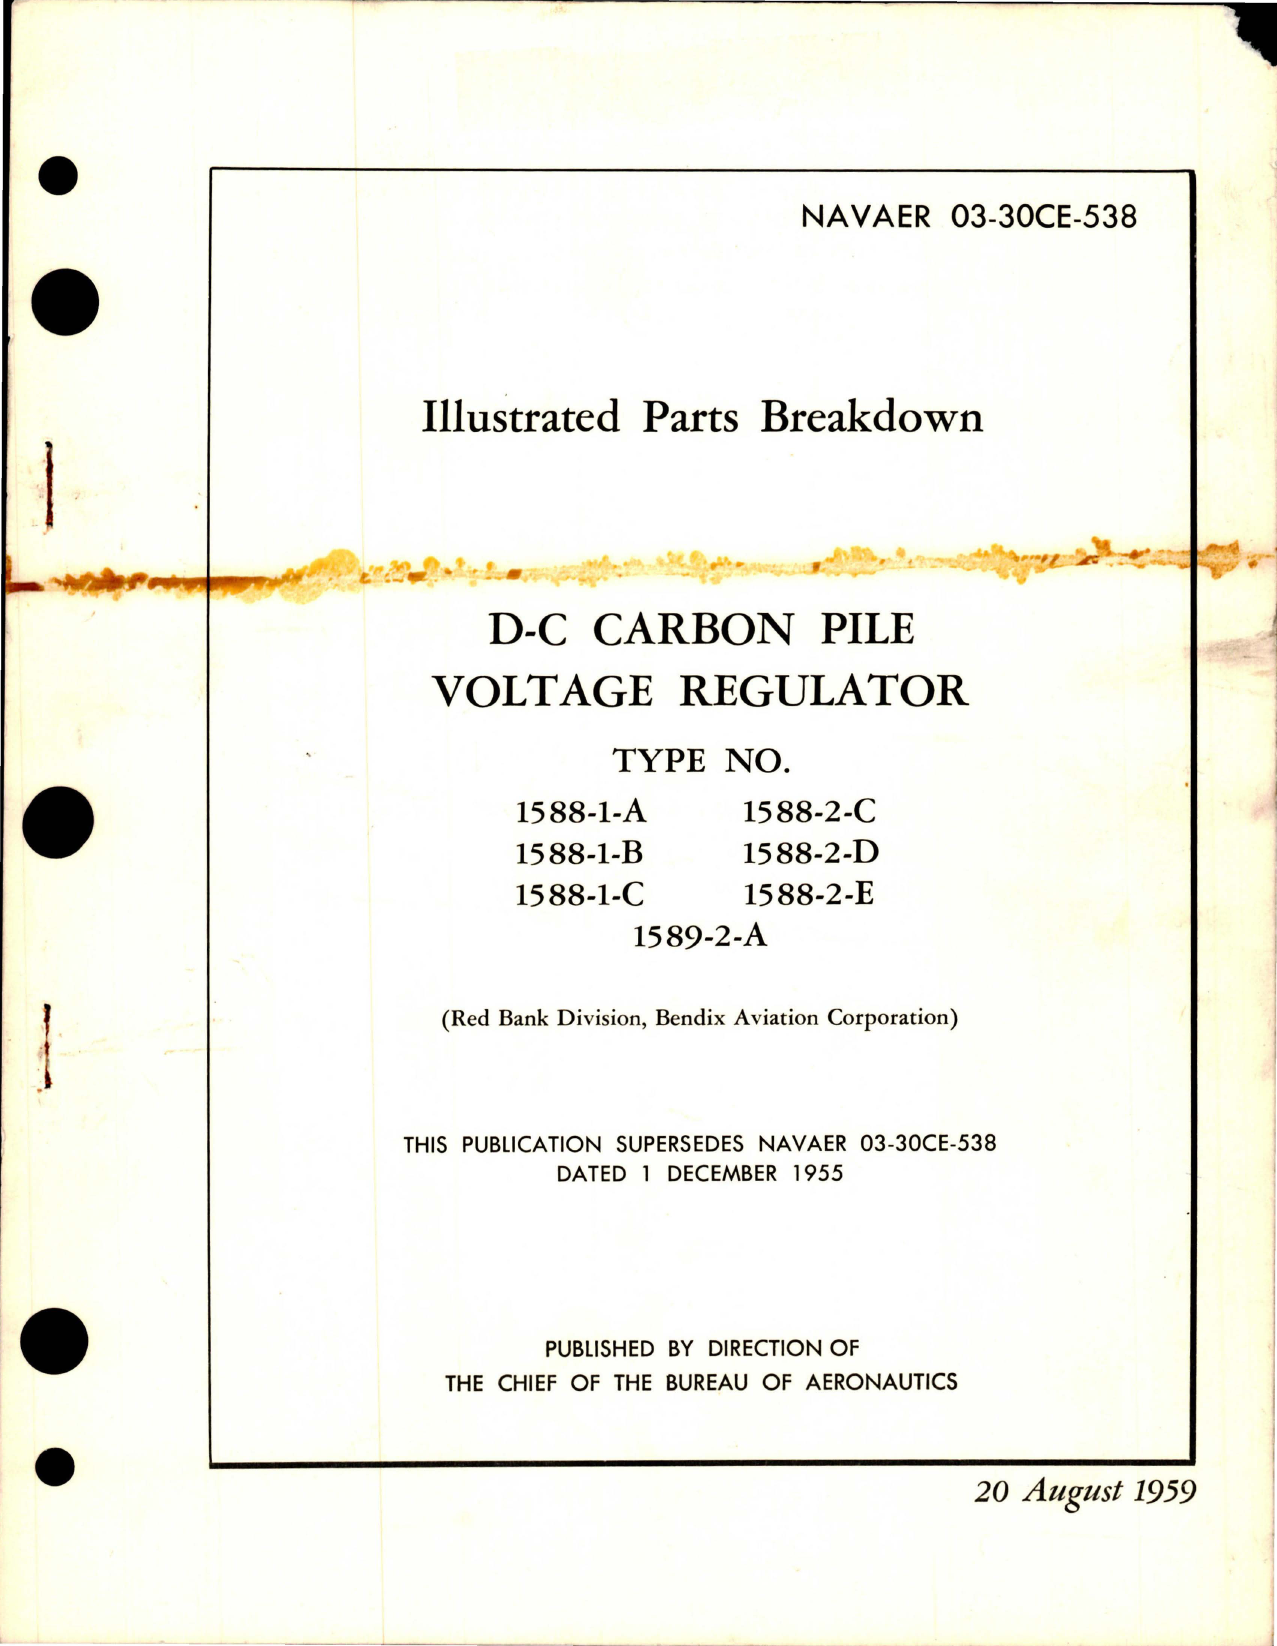 Sample page 1 from AirCorps Library document: Illustrated Parts Breakdown for D-C Carbon Pile Voltage Regulator 